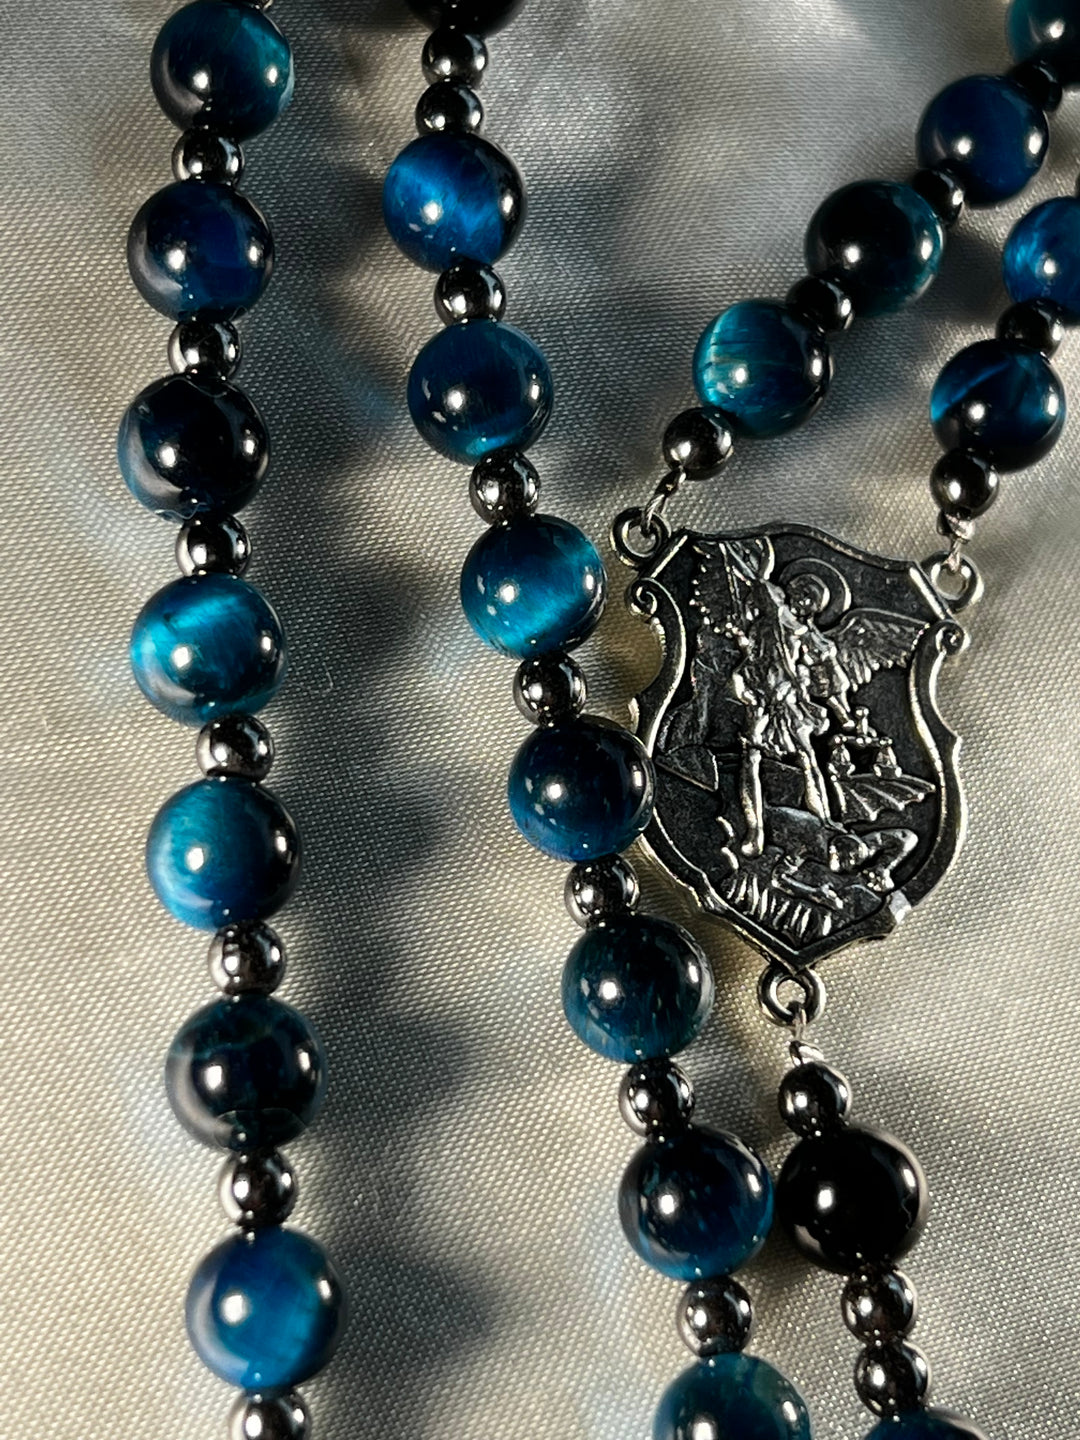 Aquamarine Tiger's Eye beads, Plated Hematite spacers with Silver St. Michael Centerpiece